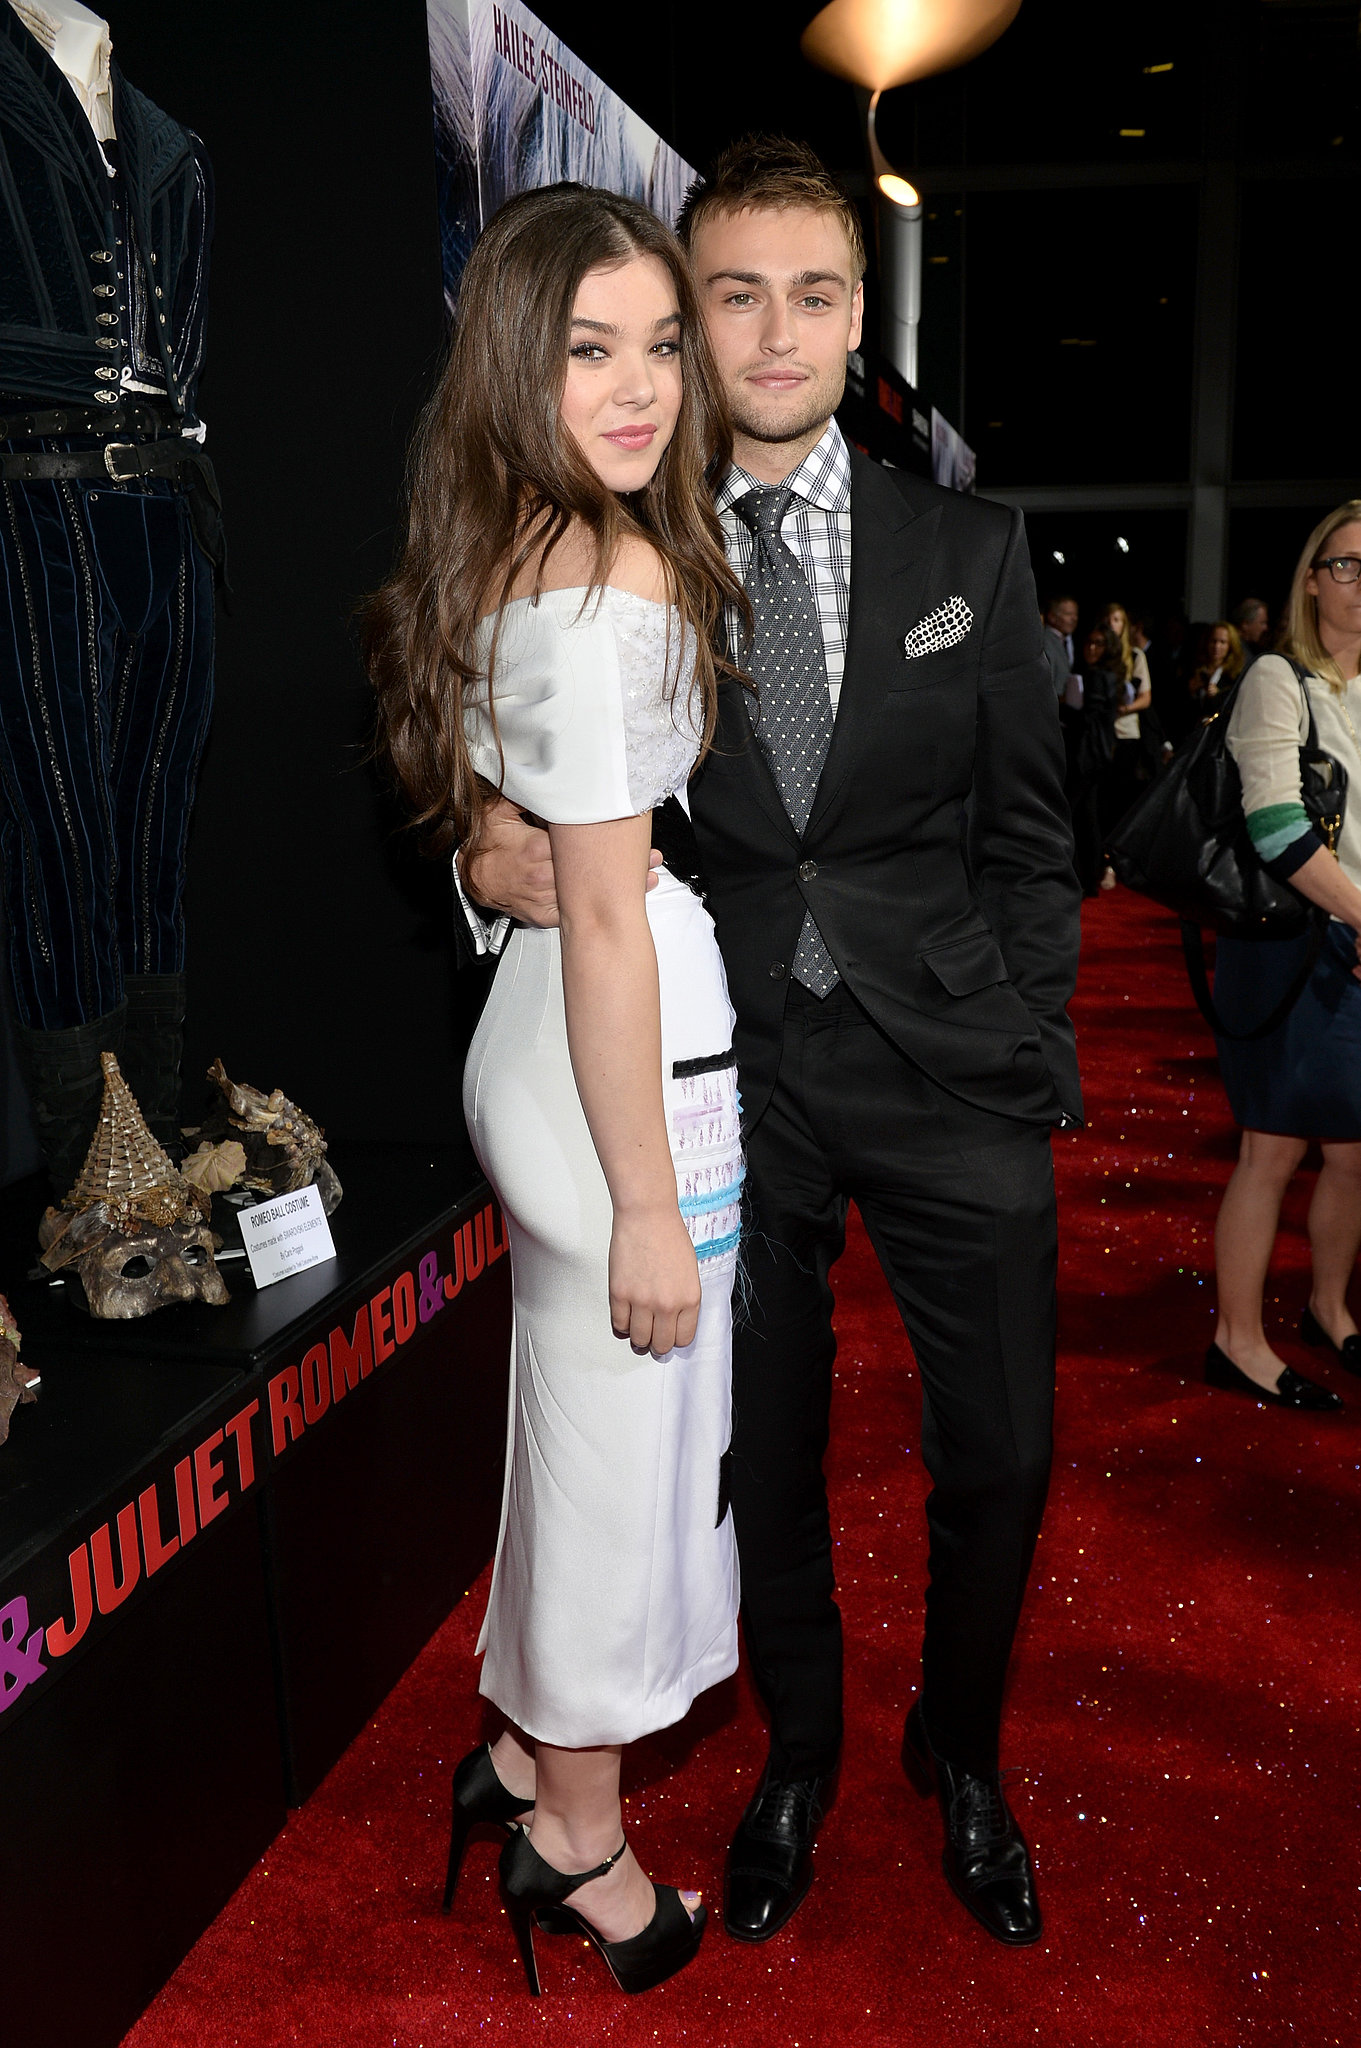 Is hailee steinfeld dating douglas booth